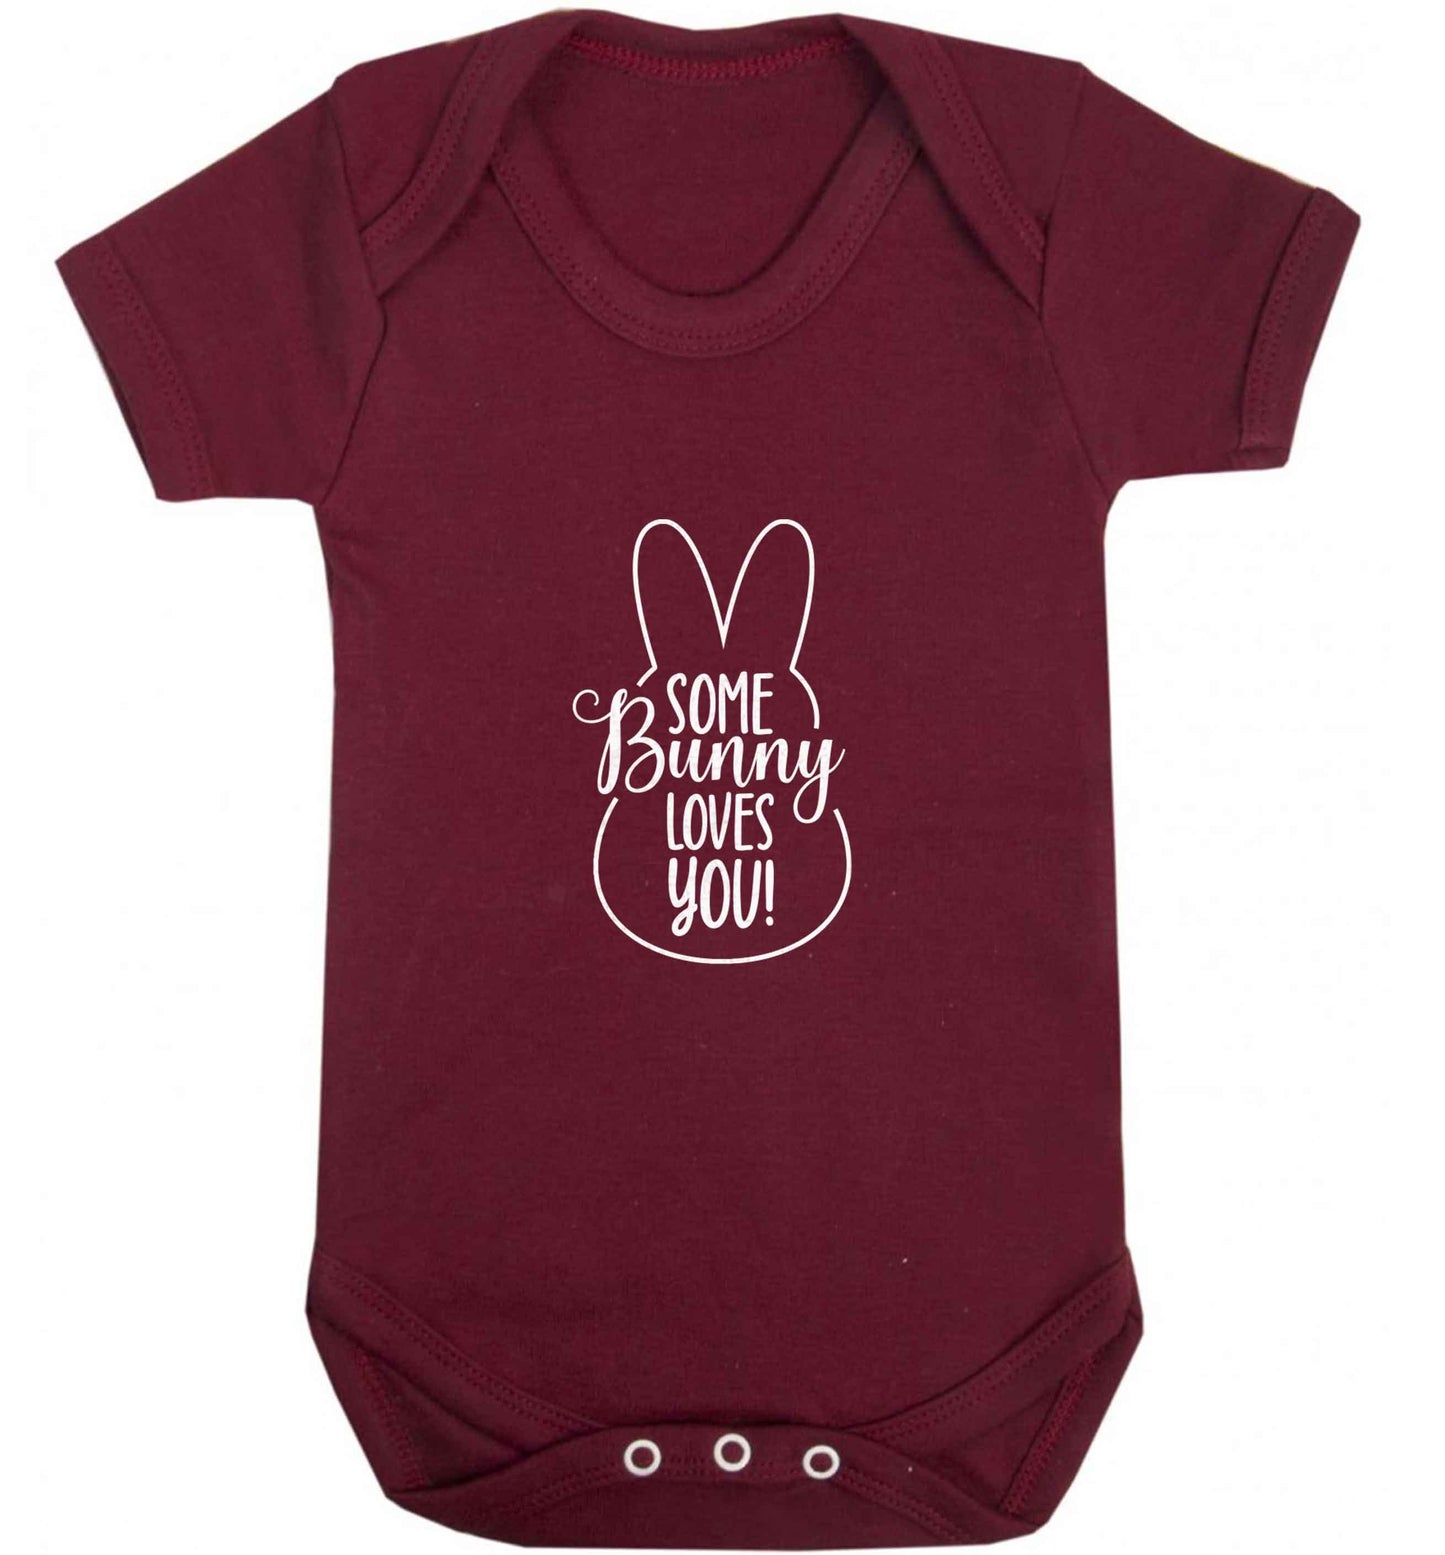 Some bunny loves you baby vest maroon 18-24 months